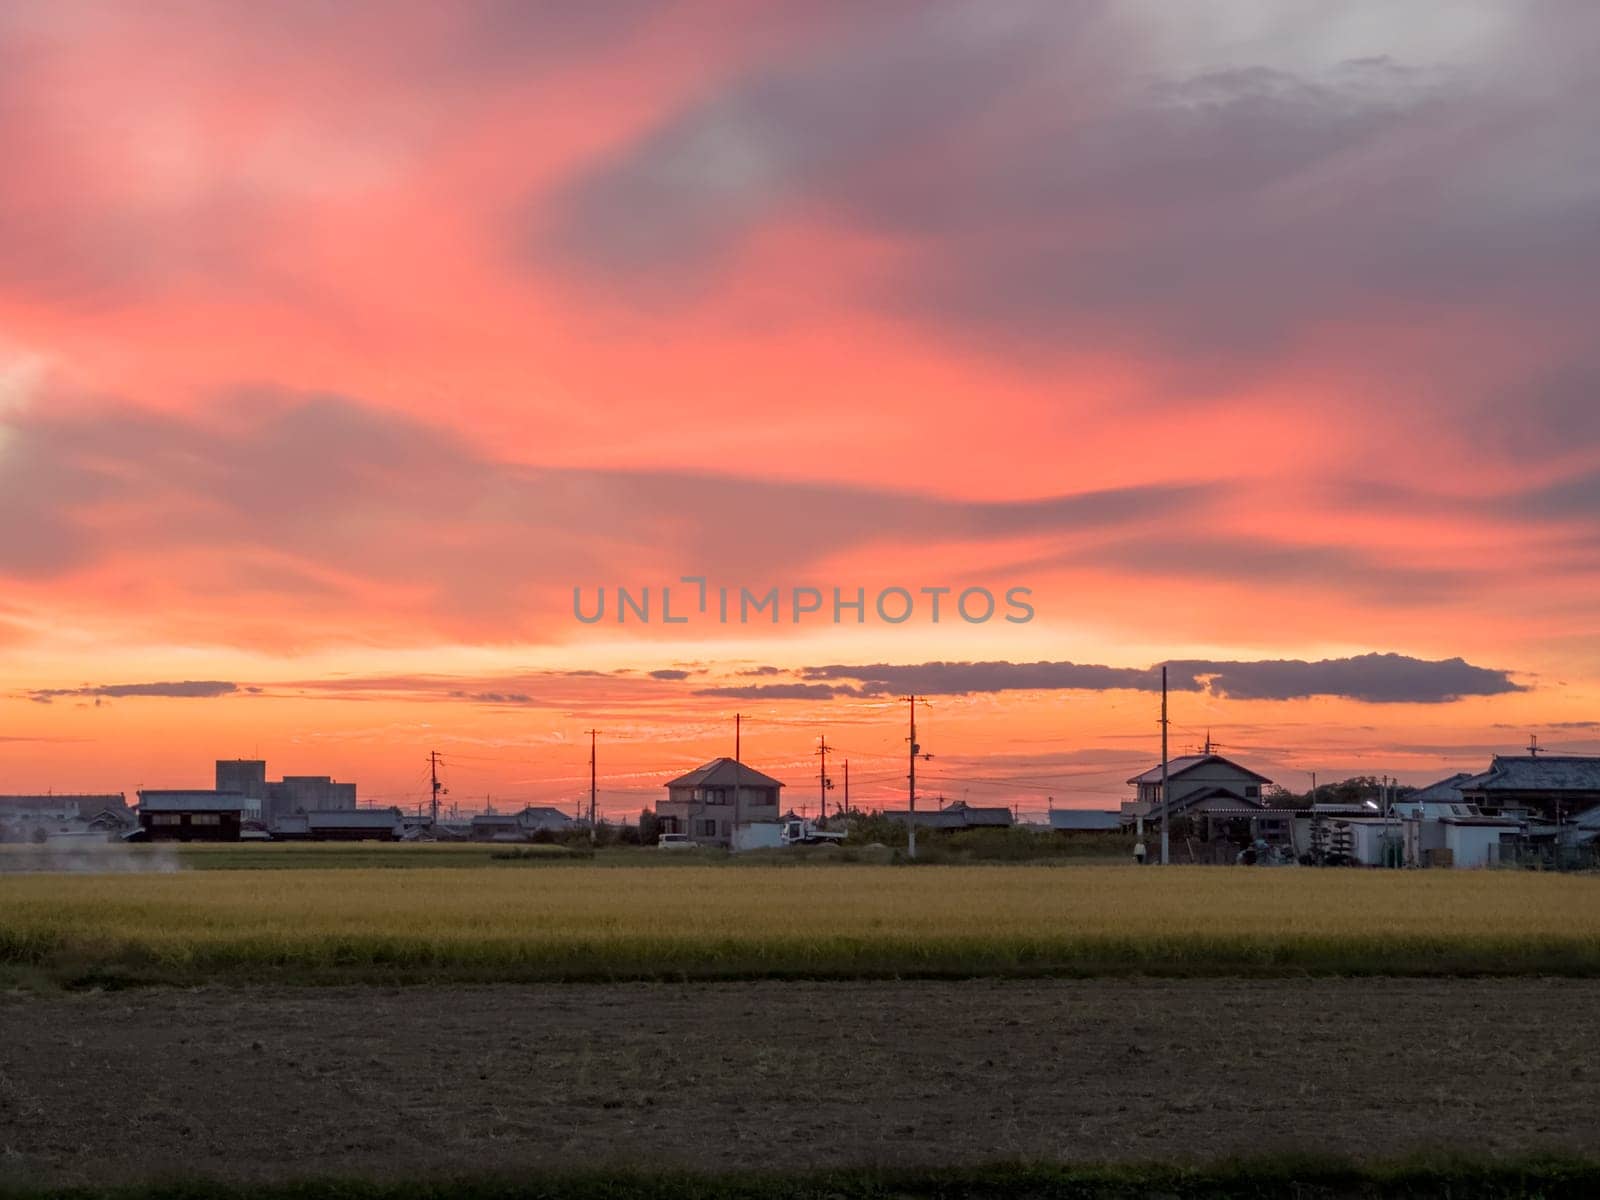 Houses by rice field in rural Japan under dramatic sunset color in sky. High quality photo